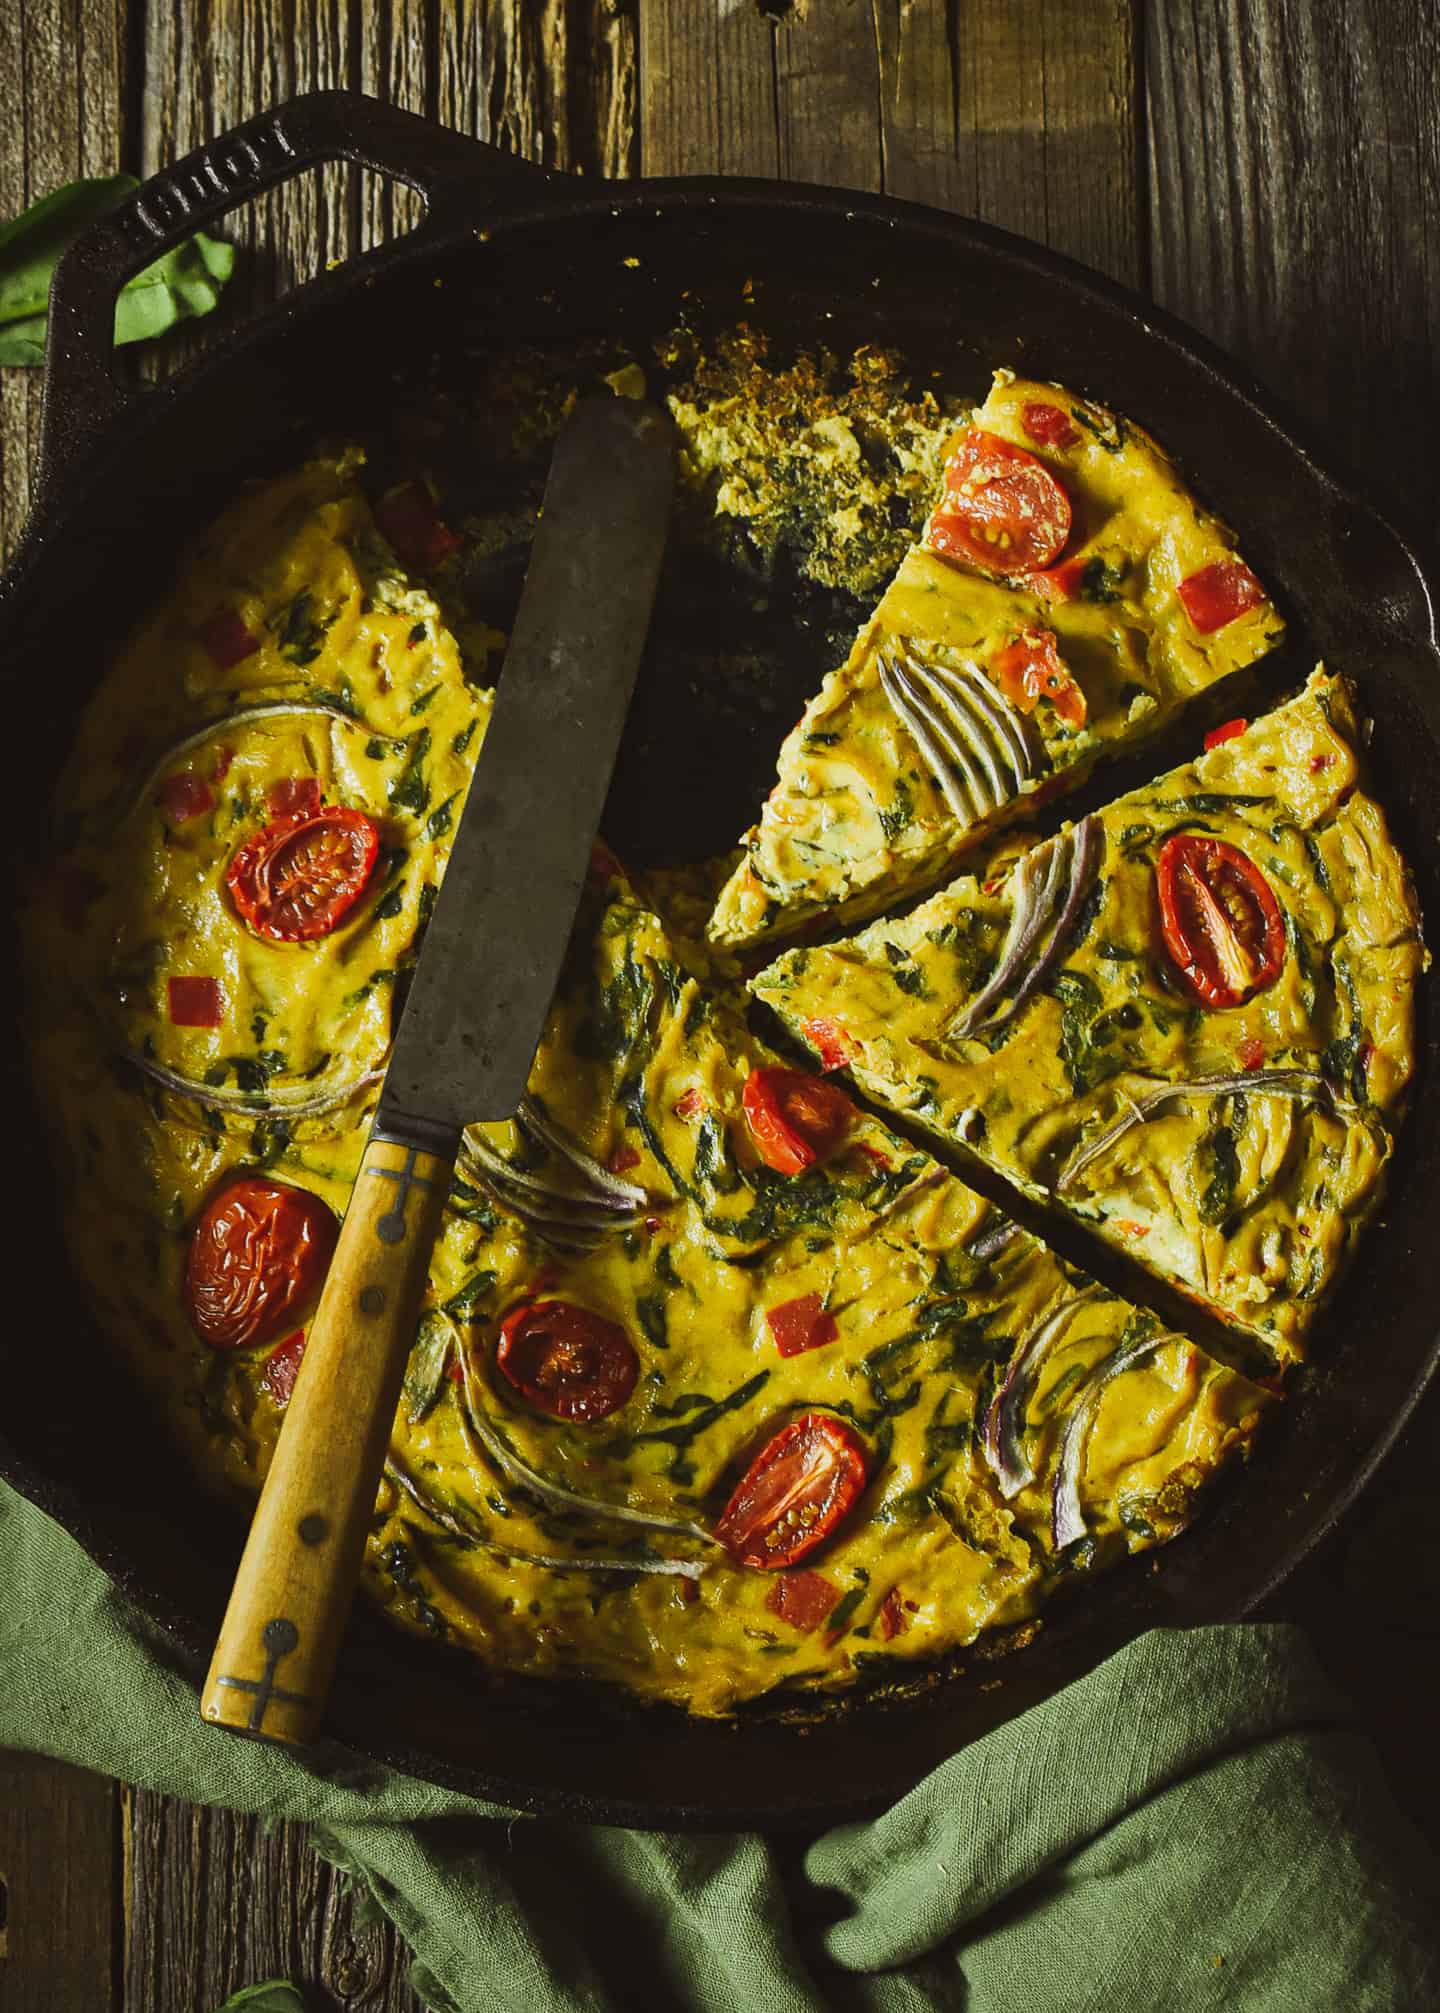 Two slices of vegetarian frittata in cast iron skillet with knife.